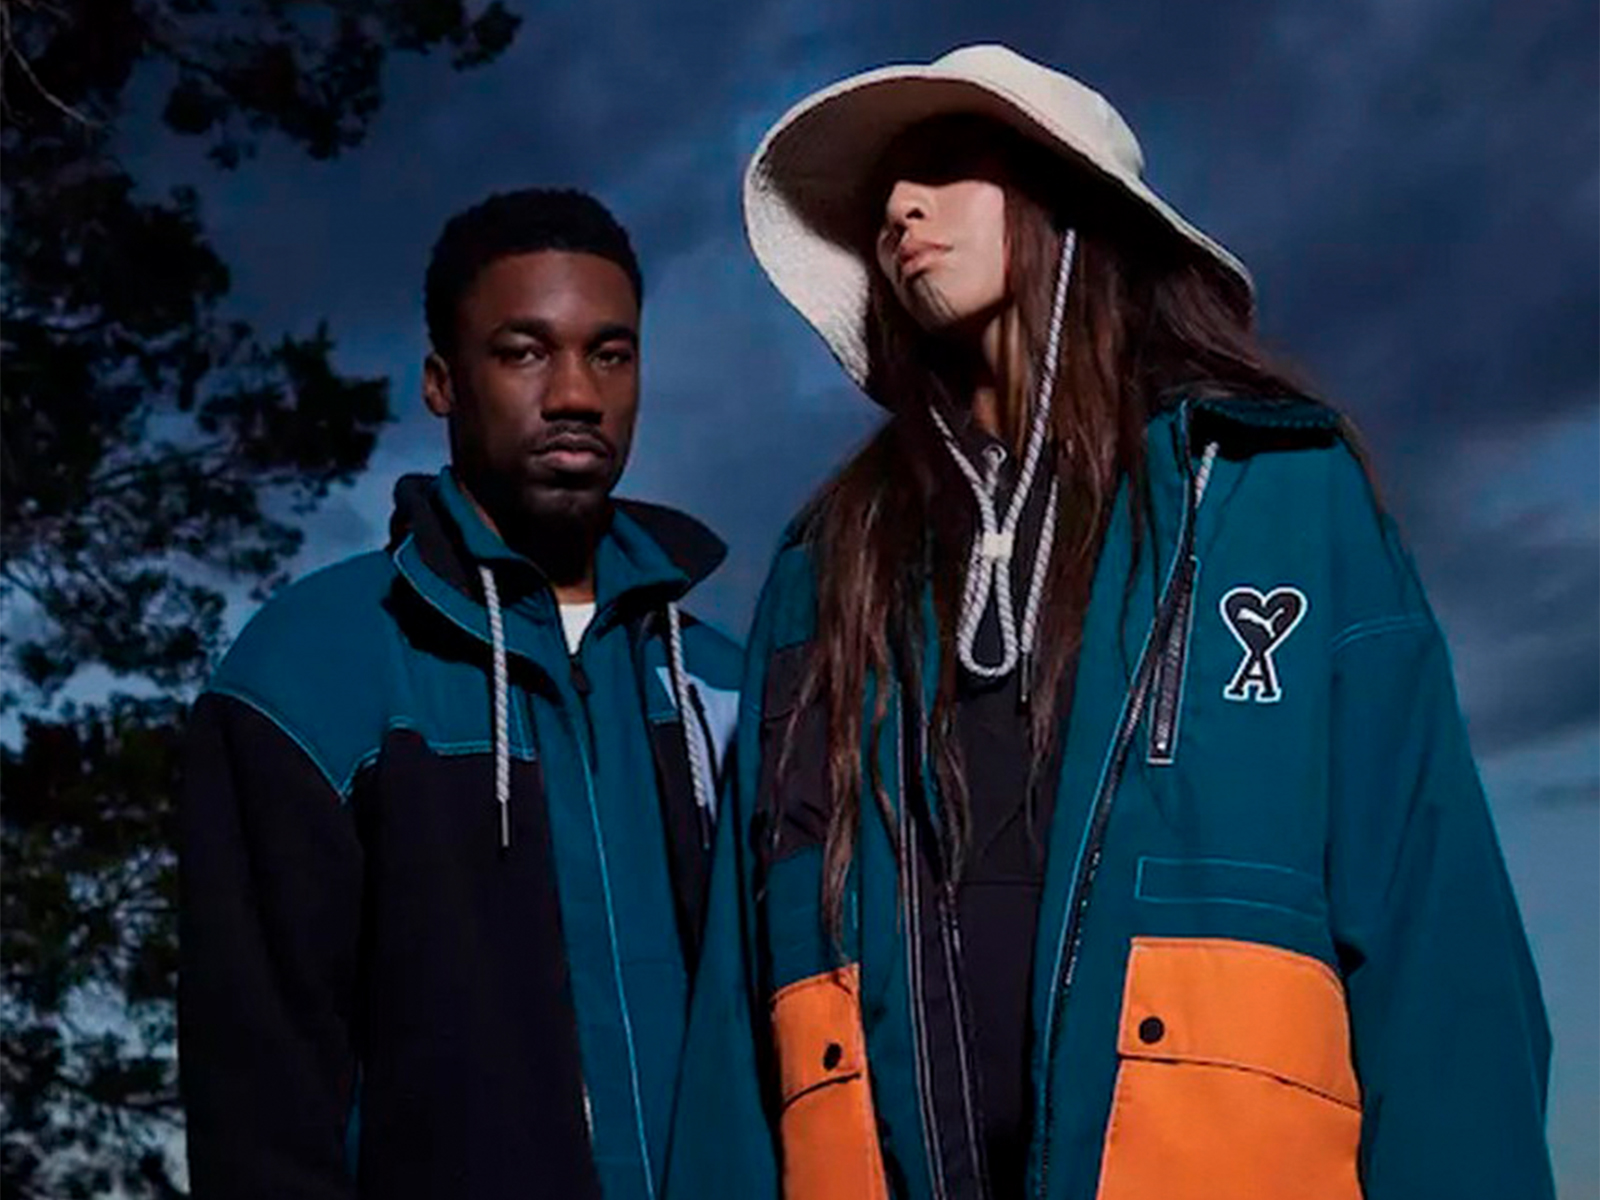 PUMA and AMI’s latest collection is inspired by outdoor activities